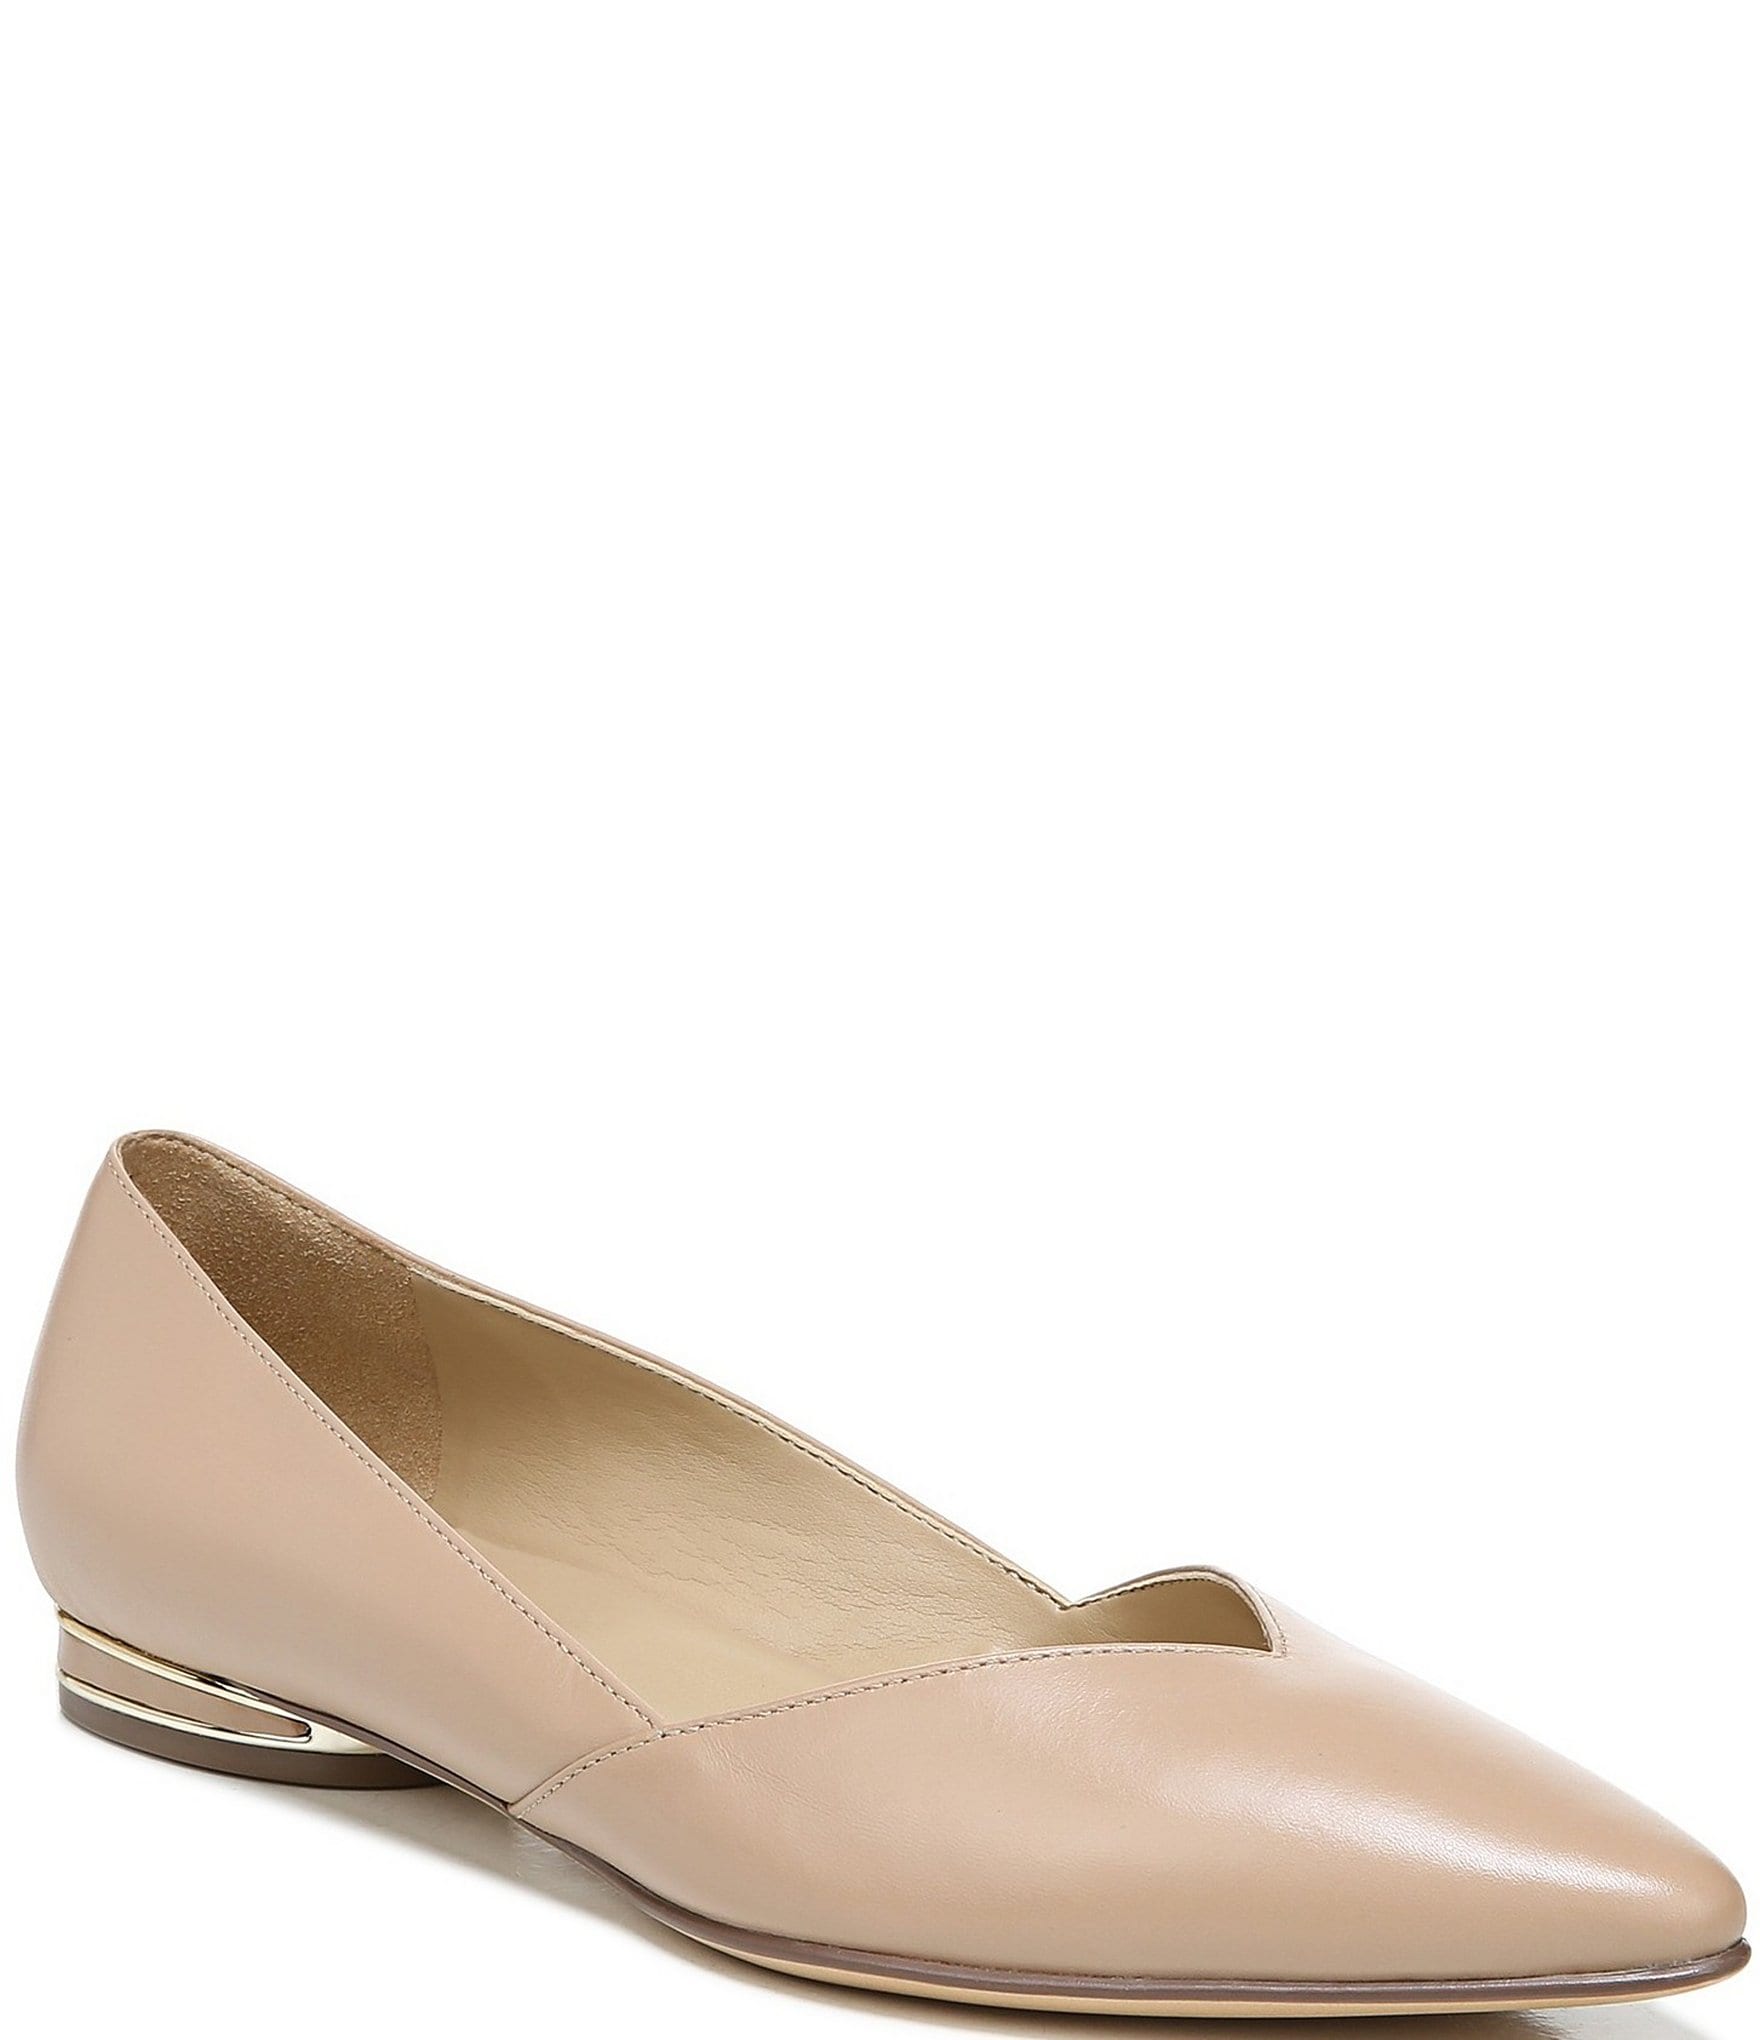 Details about   Naturalizer Brynn Women's FLATS Saddle